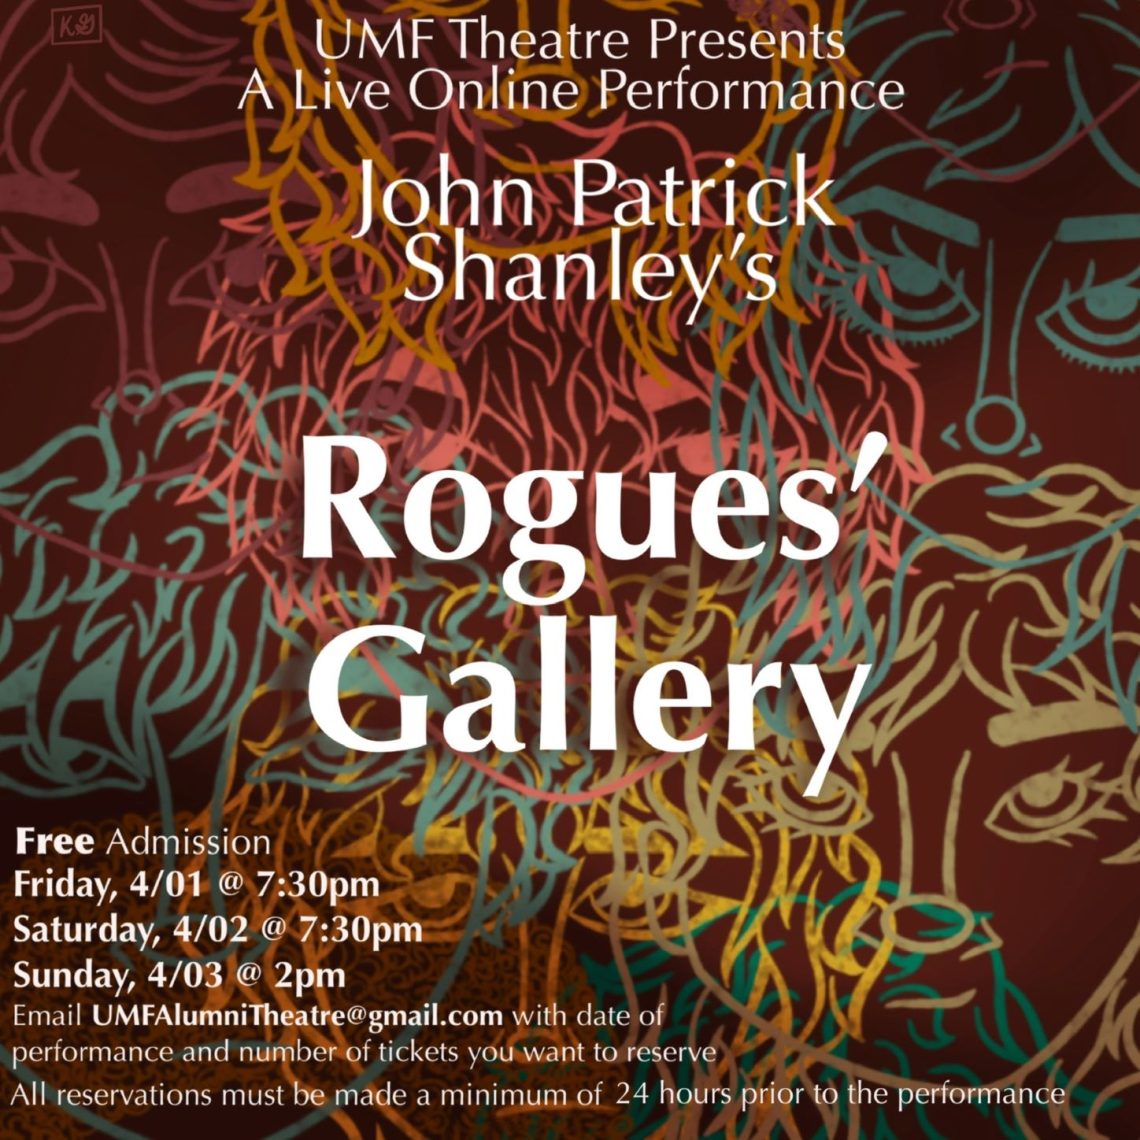 Poster for "Rogues Gallery" online theater performance